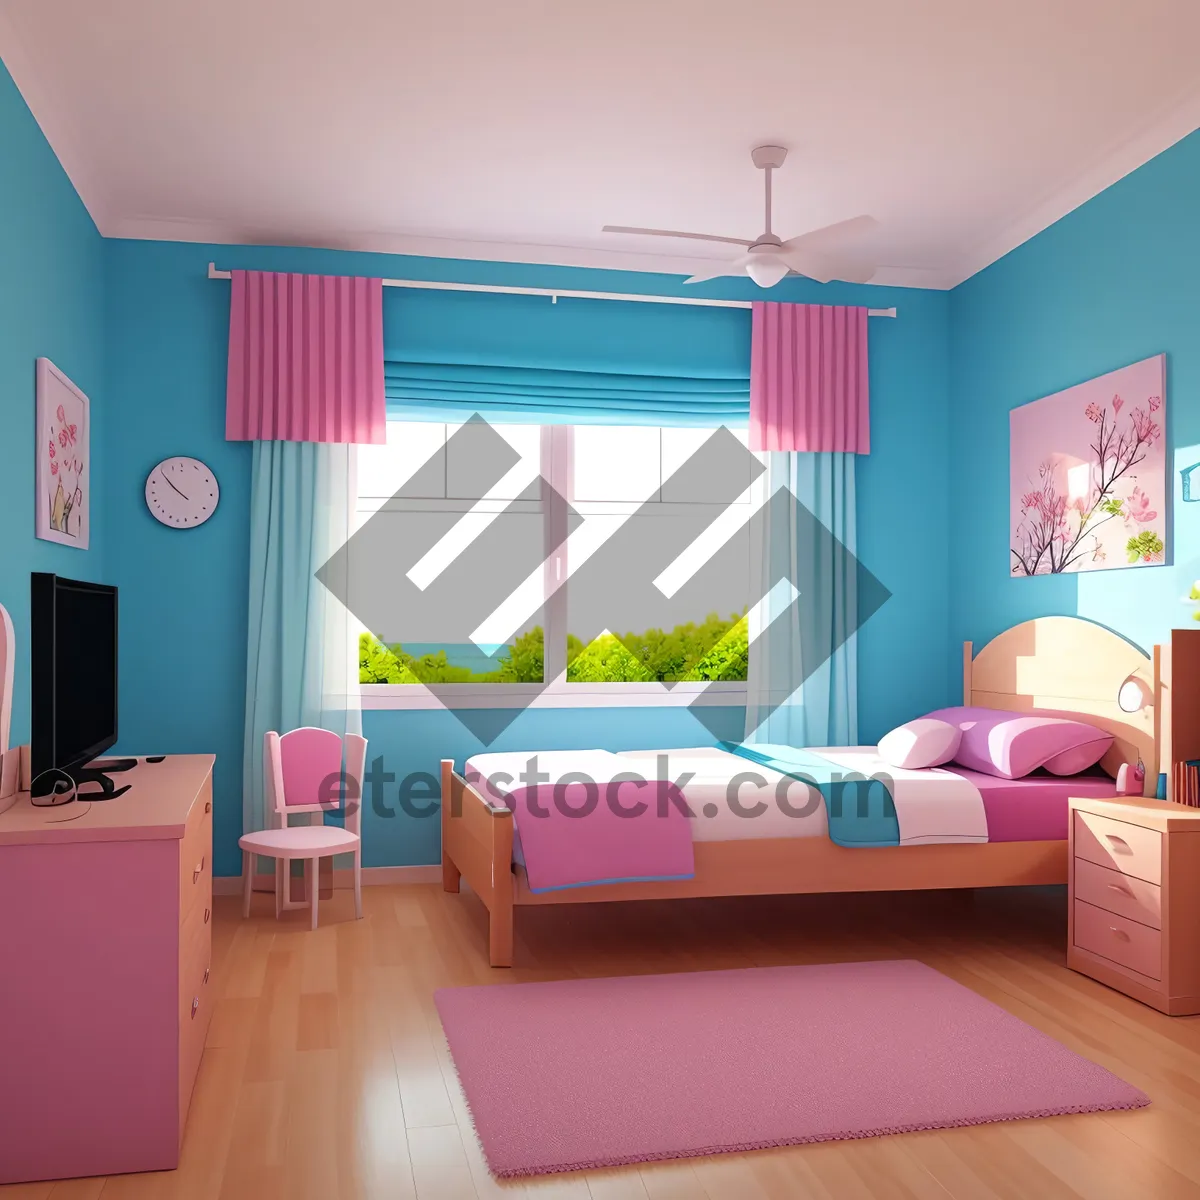 Picture of Modern Interior Bedroom with Comfortable Sofa and Stylish Decor